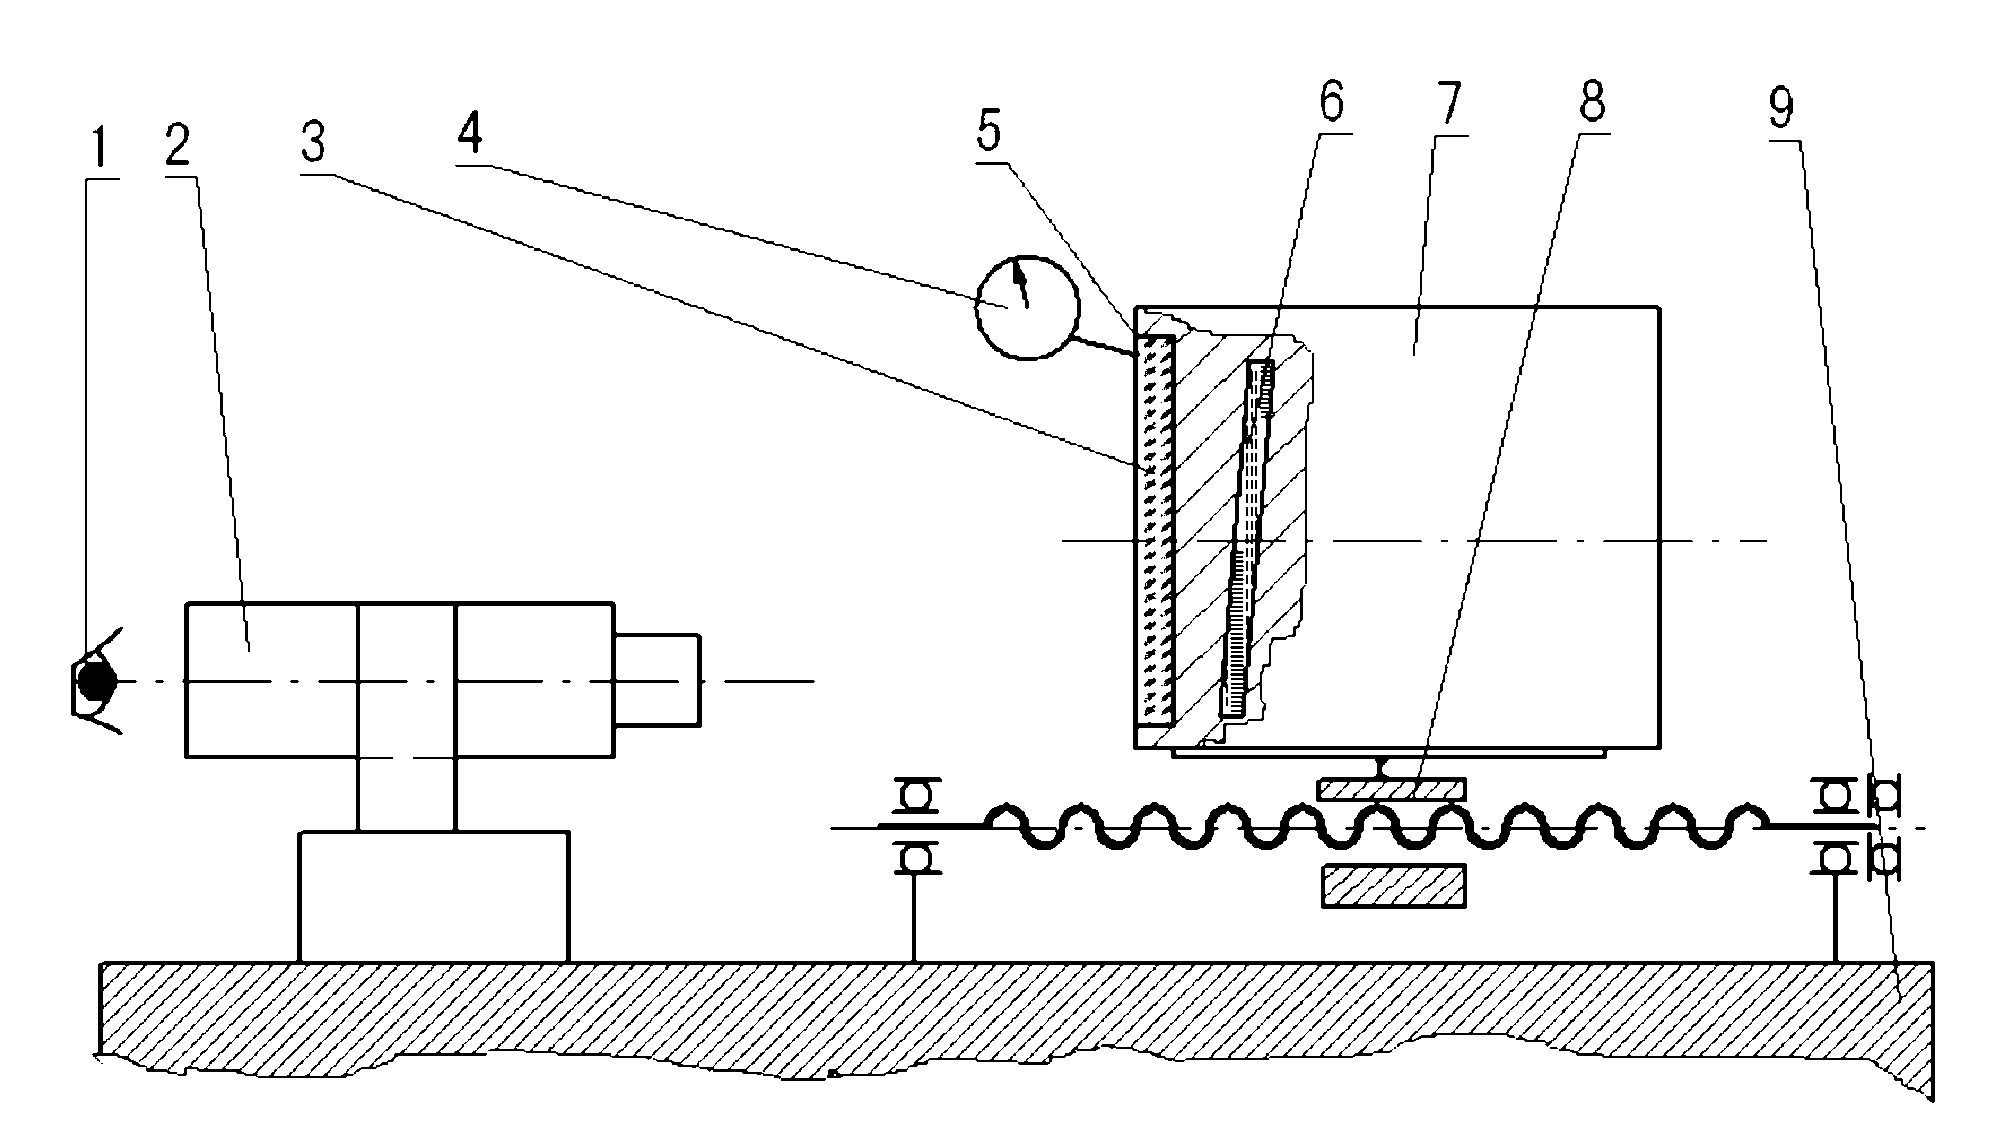 Optical detection method for parallelism of planar array CCD target surface and installation locating surface